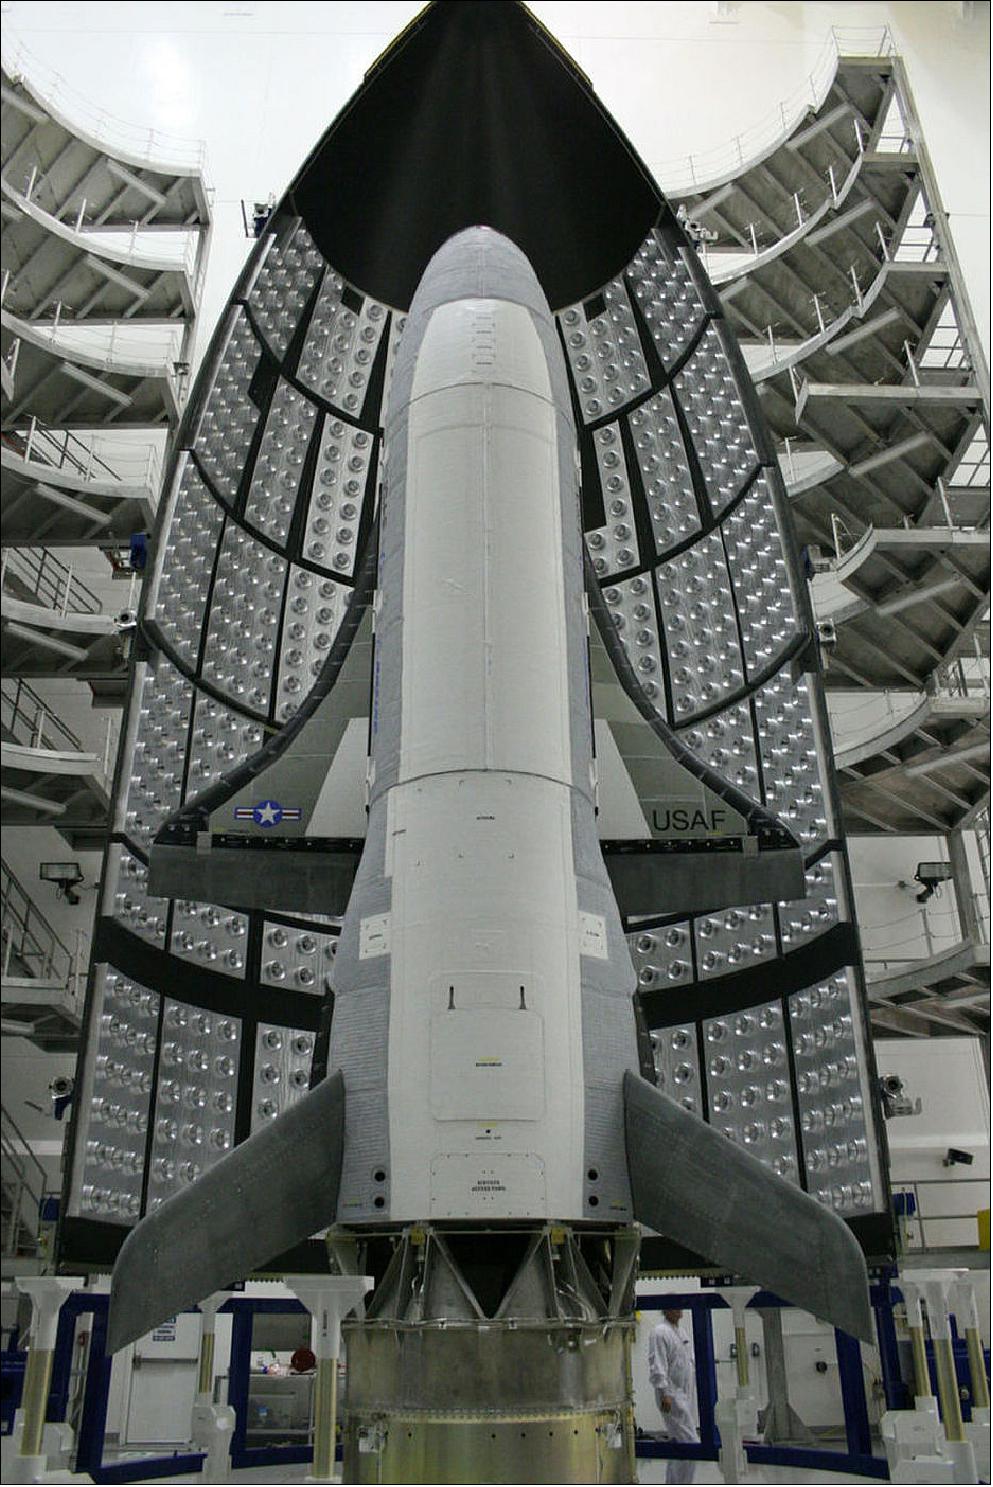 Figure 3: The first X-37B Orbital Test Vehicle waits in the encapsulation cell of the EELV (Evolved Expendable Launch Vehicle) April 5, 2010, at the Astrotech facility in Titusville, Fla. Half of the Atlas-V 5 m fairing is visible in the background. The OTV-1 launch on April 22, 2010 on a ULA vehicle from KSC, FL (image credit: USAF)